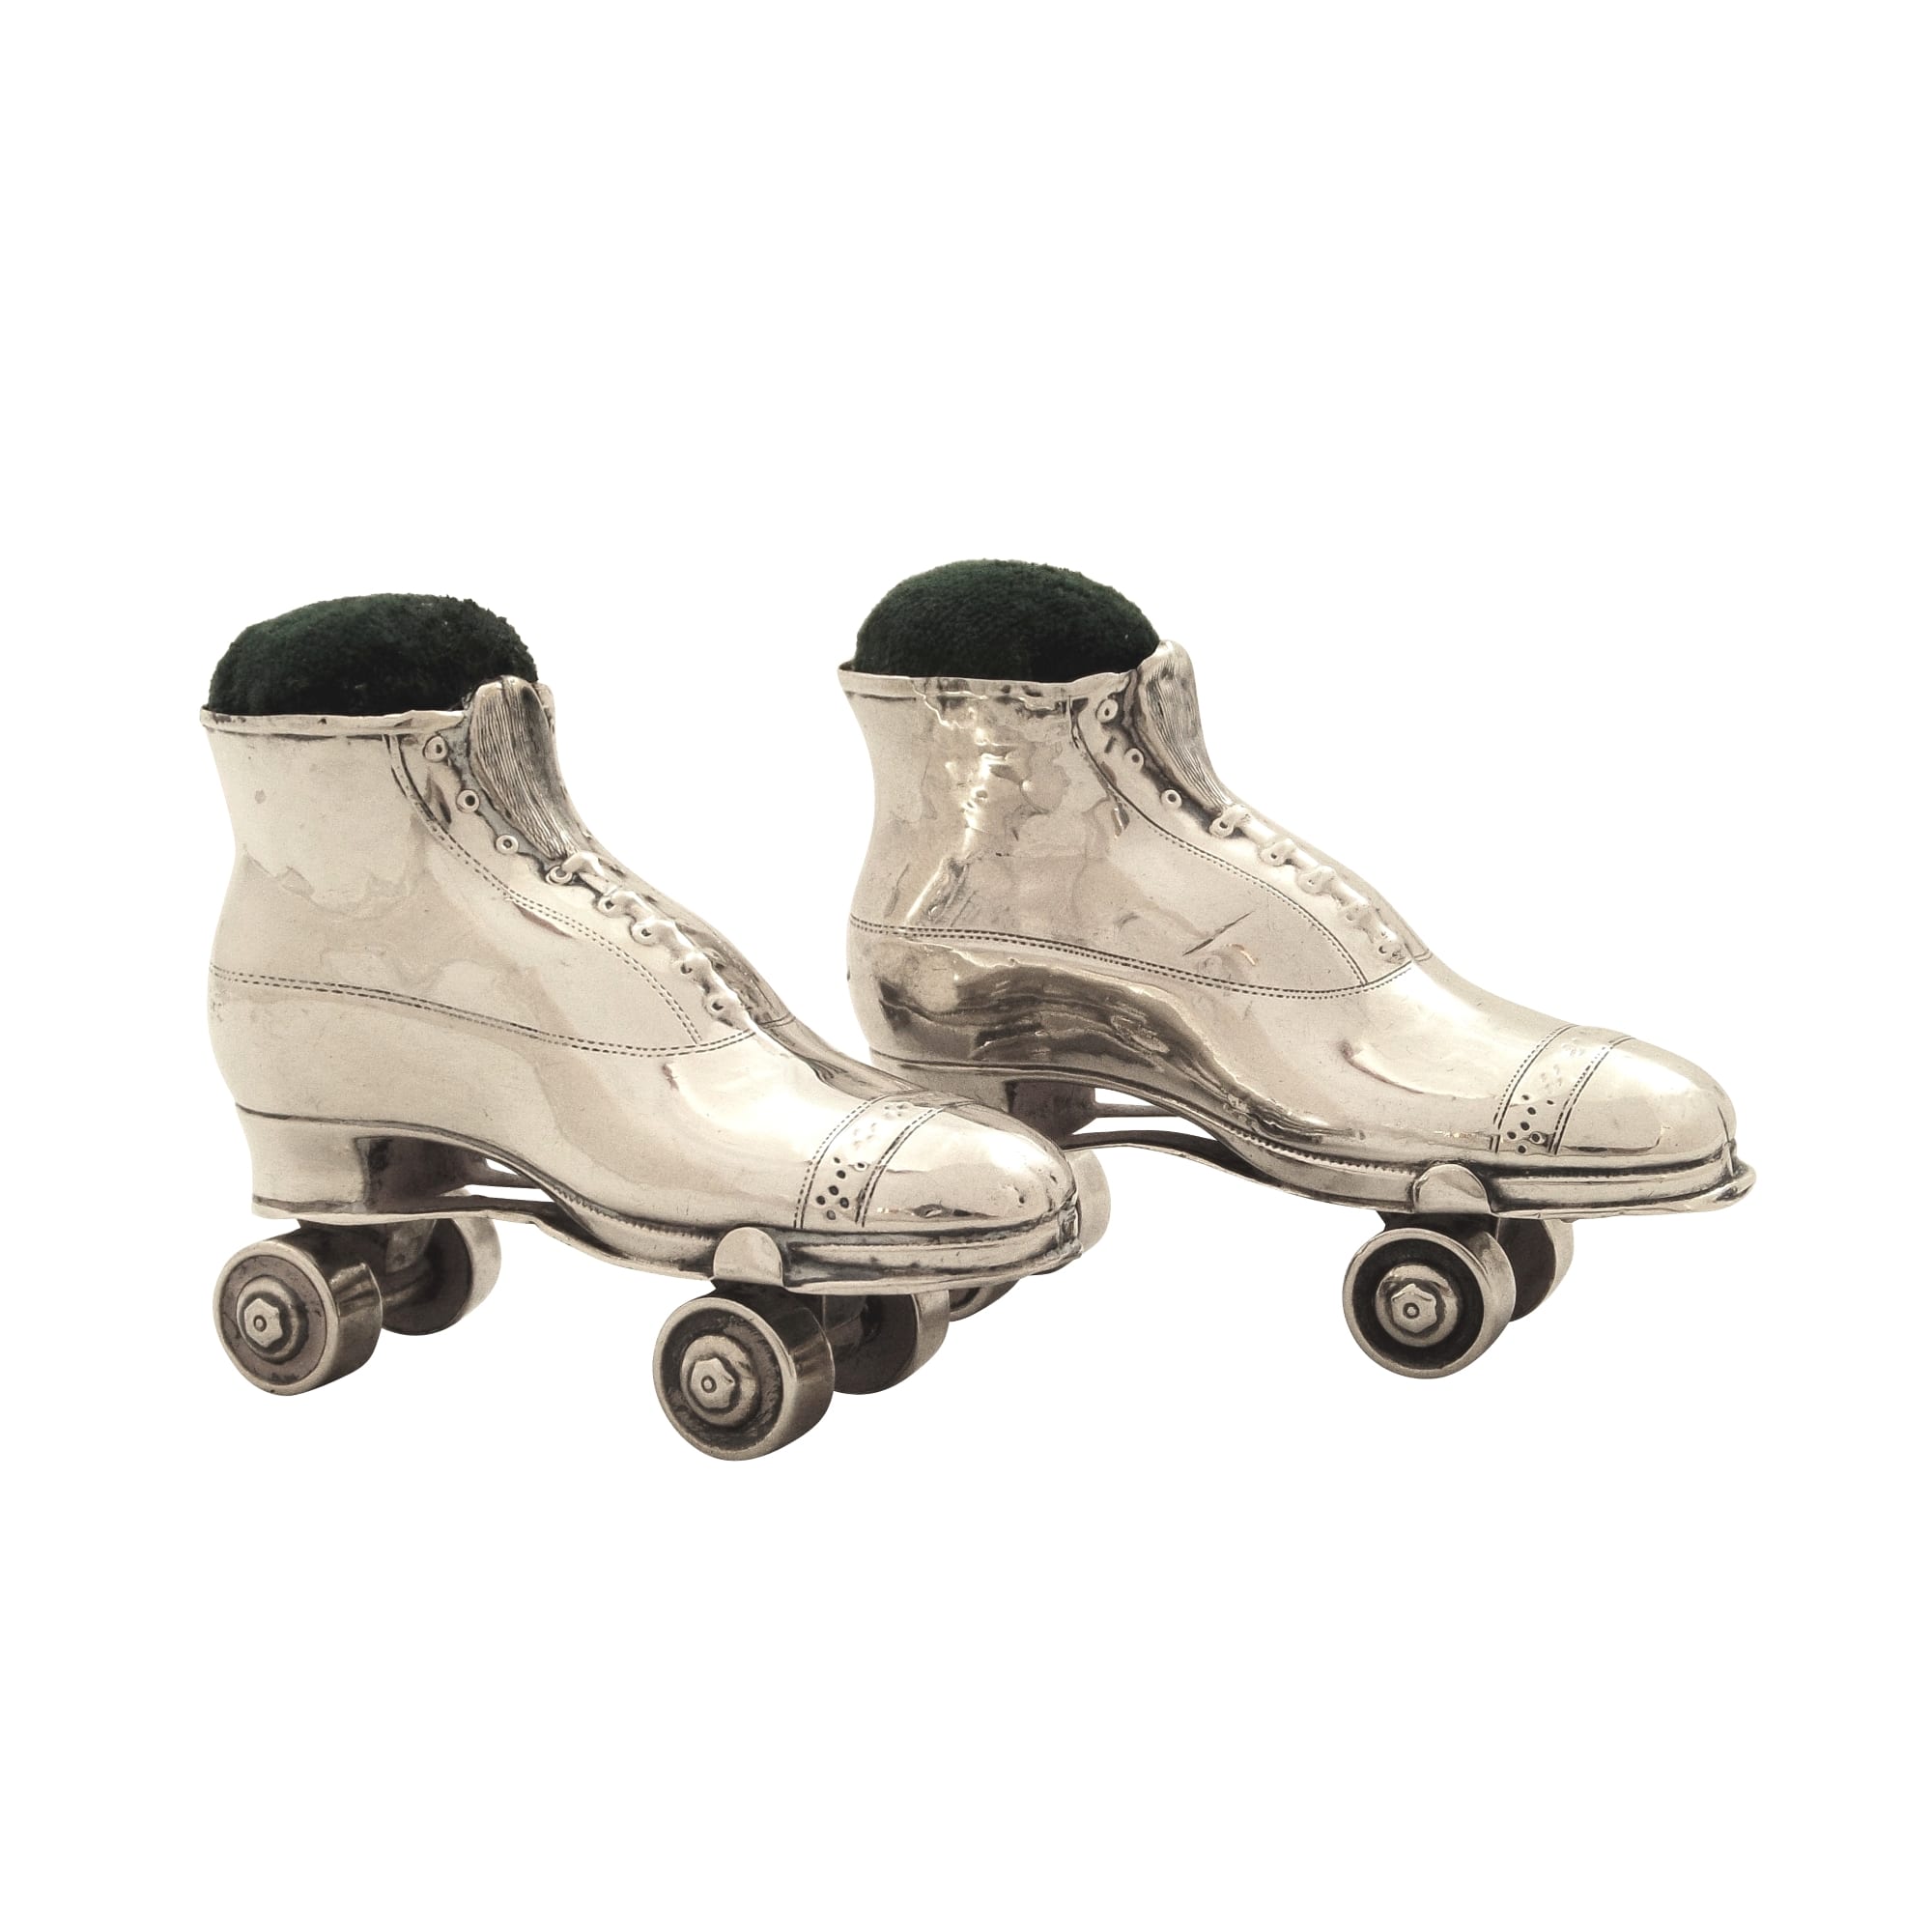 Pair of Antique Edwardian Sterling Silver Roller Skate Pin Cushions 1910